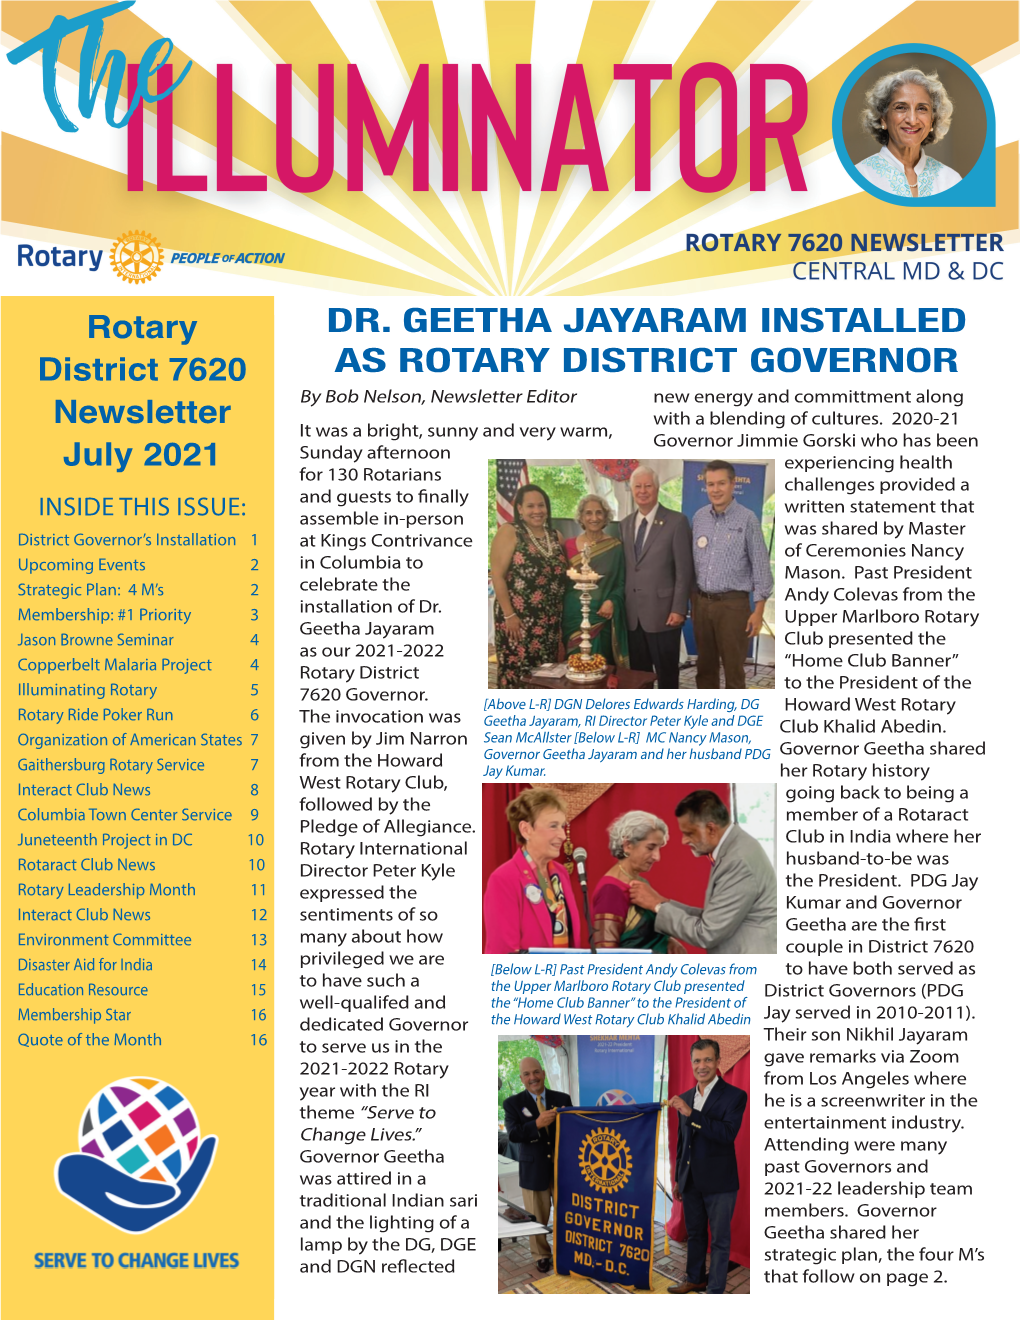 Rotary District 7620 Newsletter